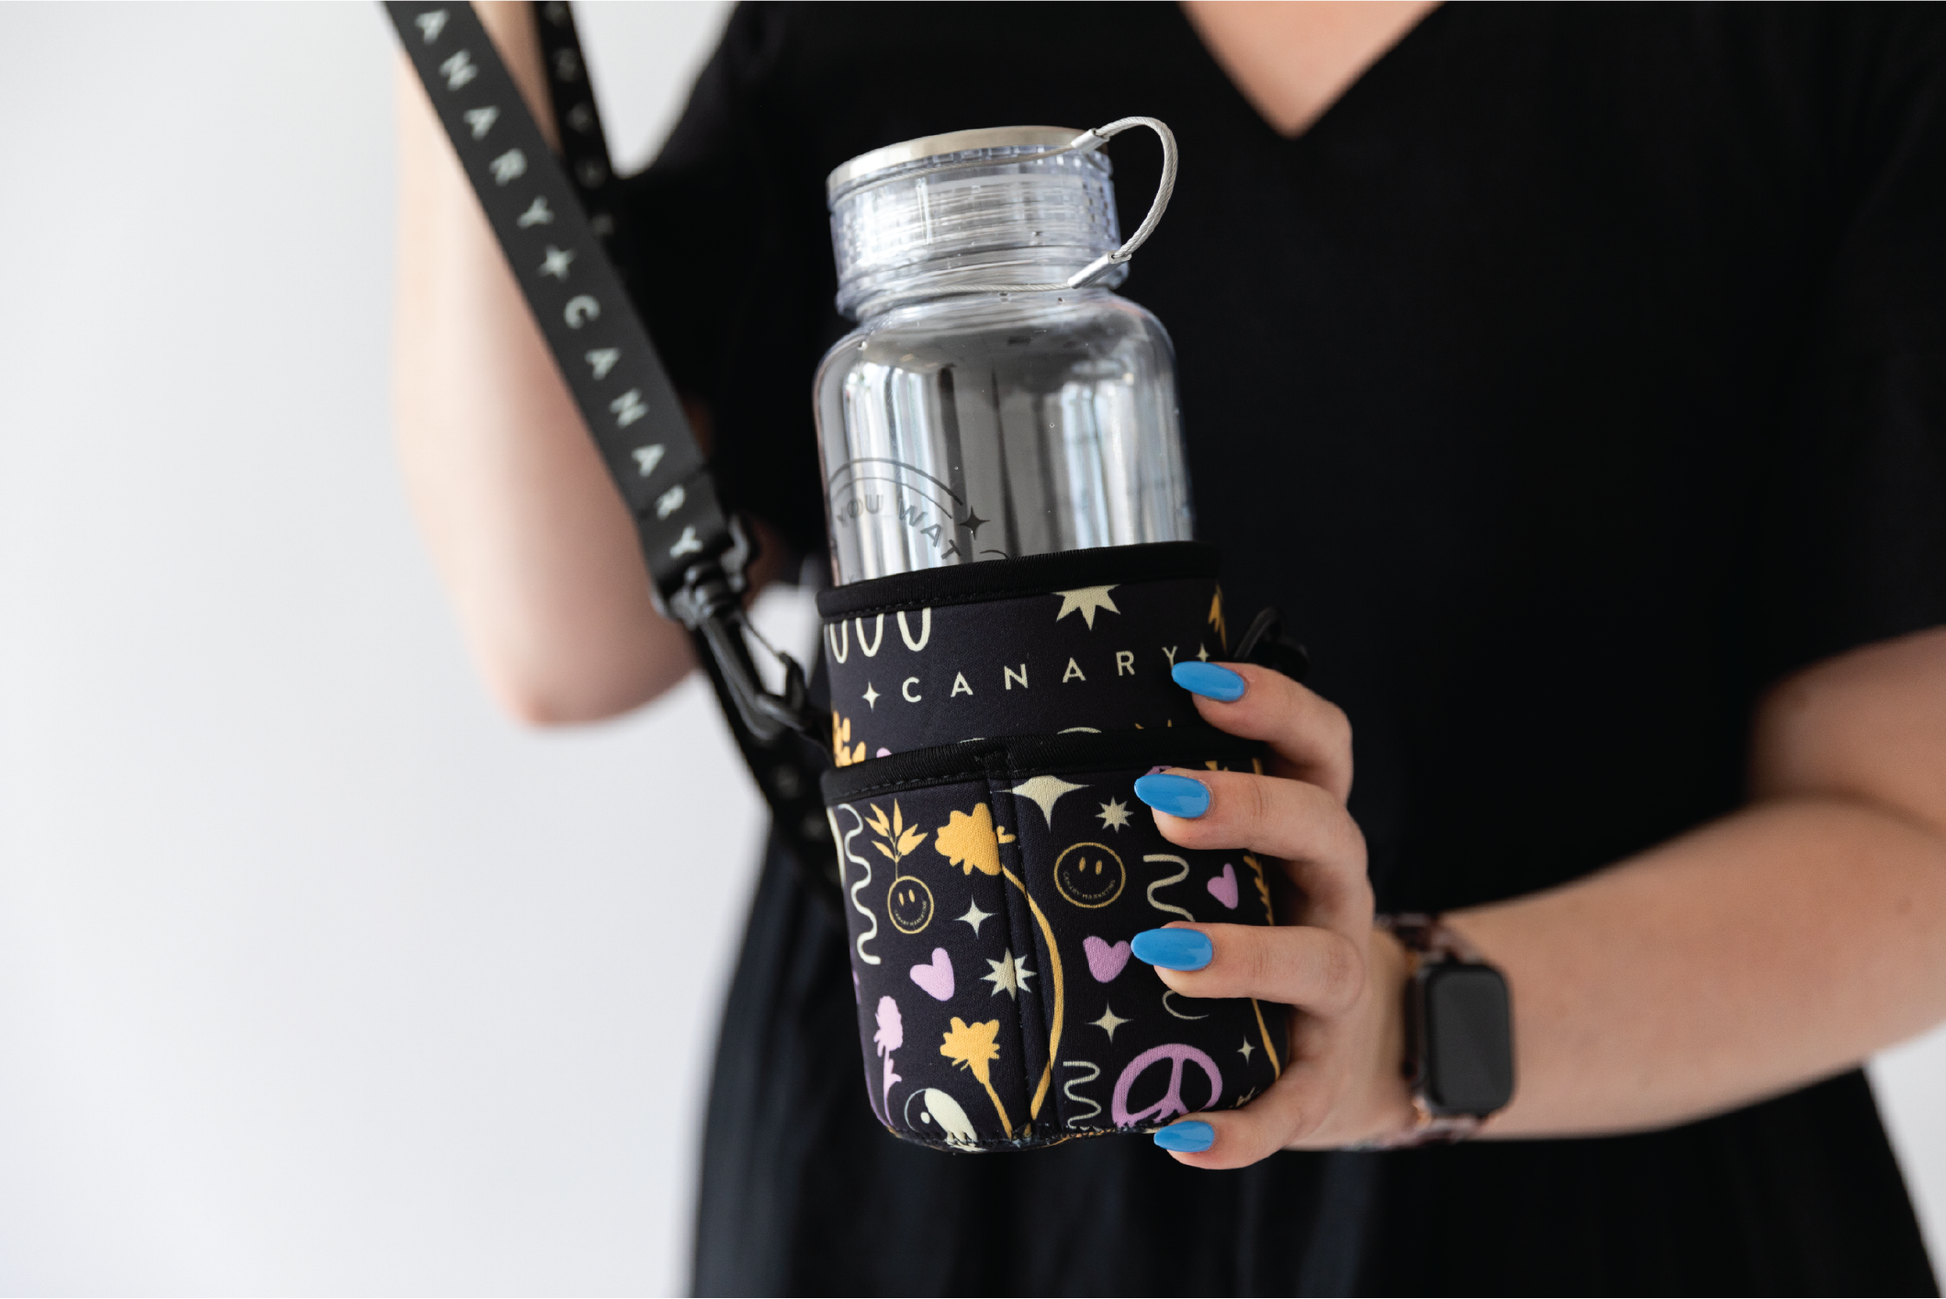 14. THE CANARY WATER BOTTLE – Shop Canary Marketing